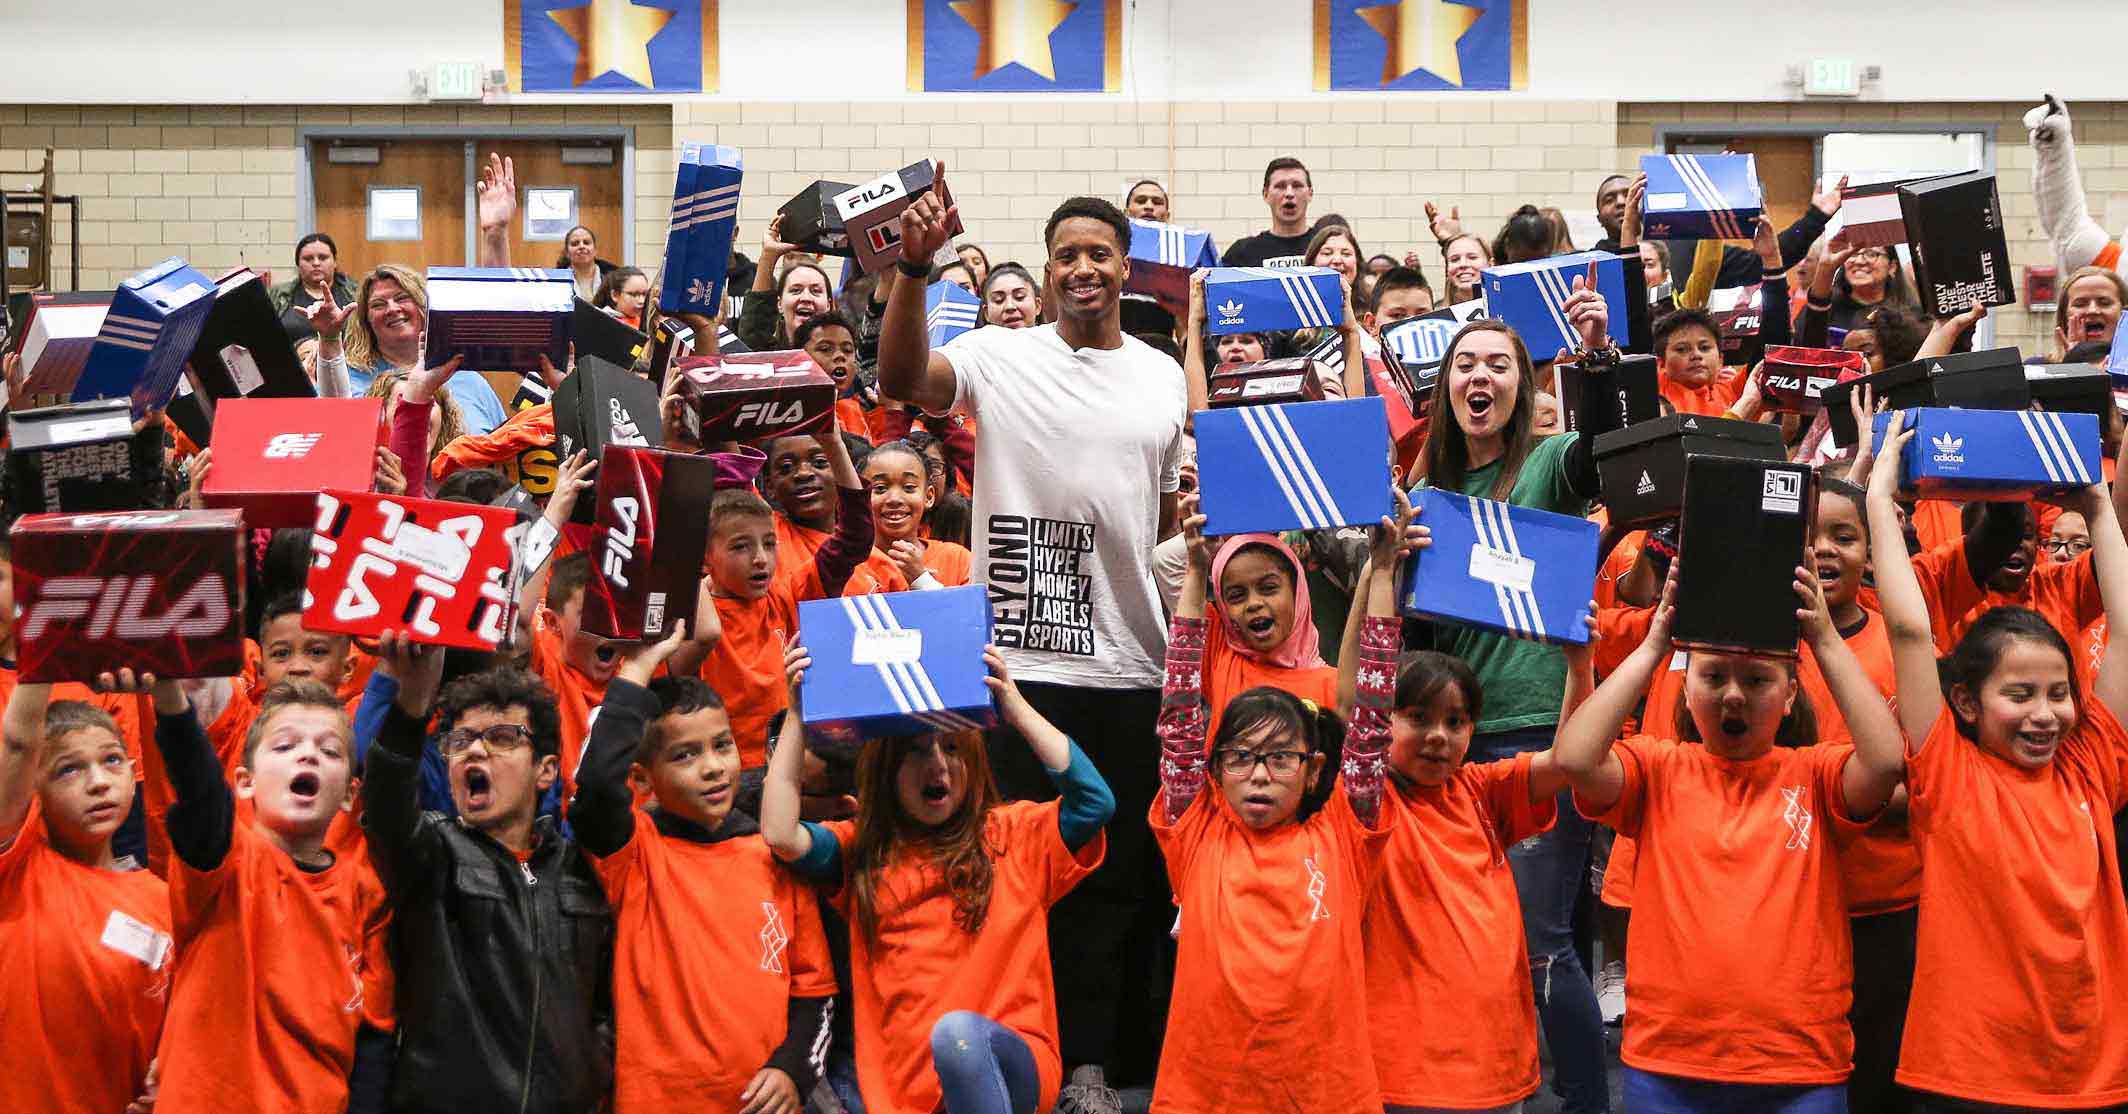 Snooze Surprises School with Shoes and NFL Star!